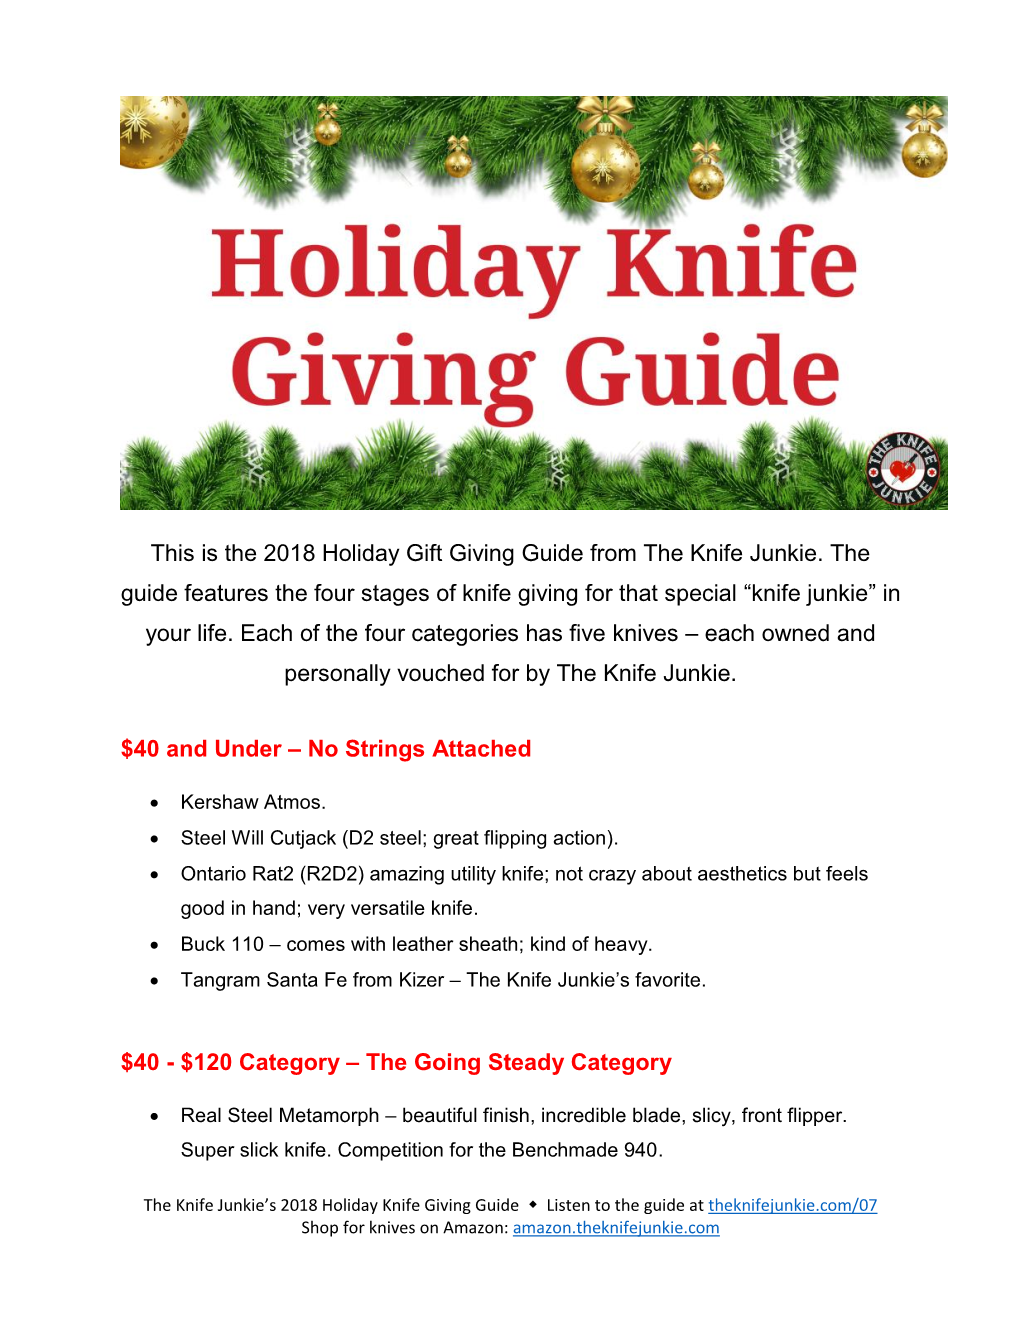 2018 Holiday Knife Giving Guide  Listen to the Guide at Theknifejunkie.Com/07 Shop for Knives on Amazon: Amazon.Theknifejunkie.Com